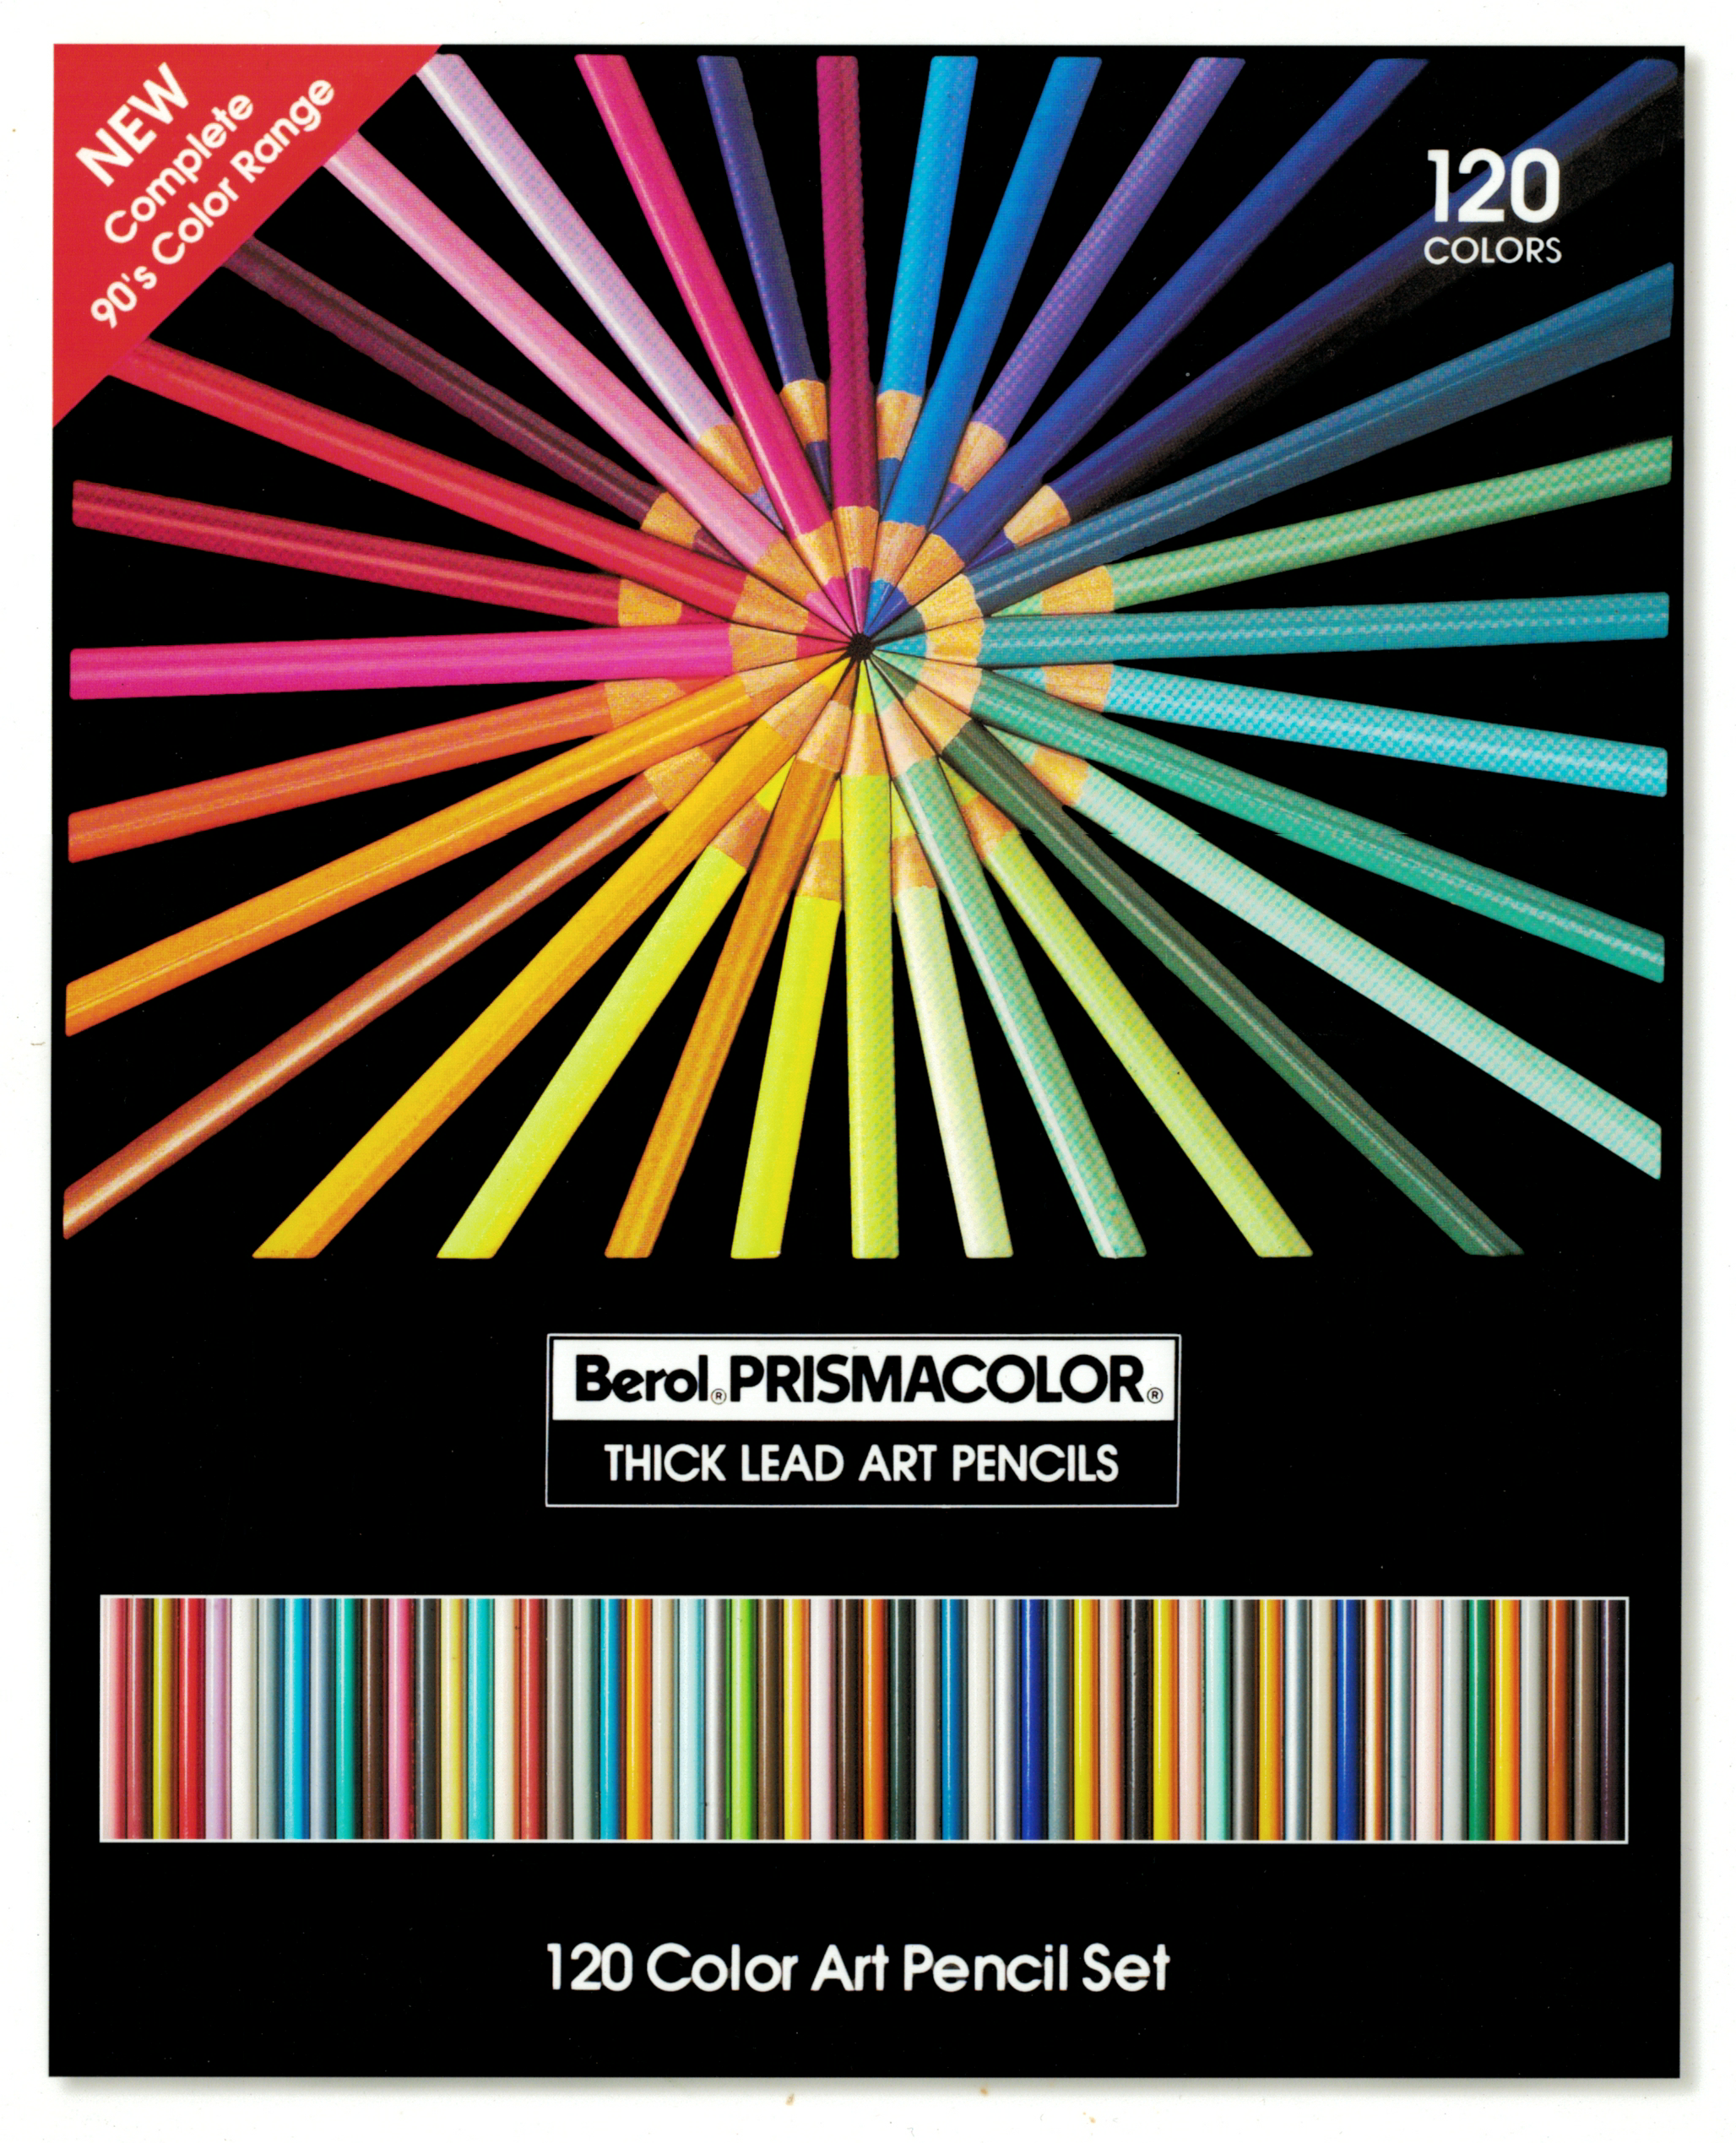 Prismacolor collection for Berol